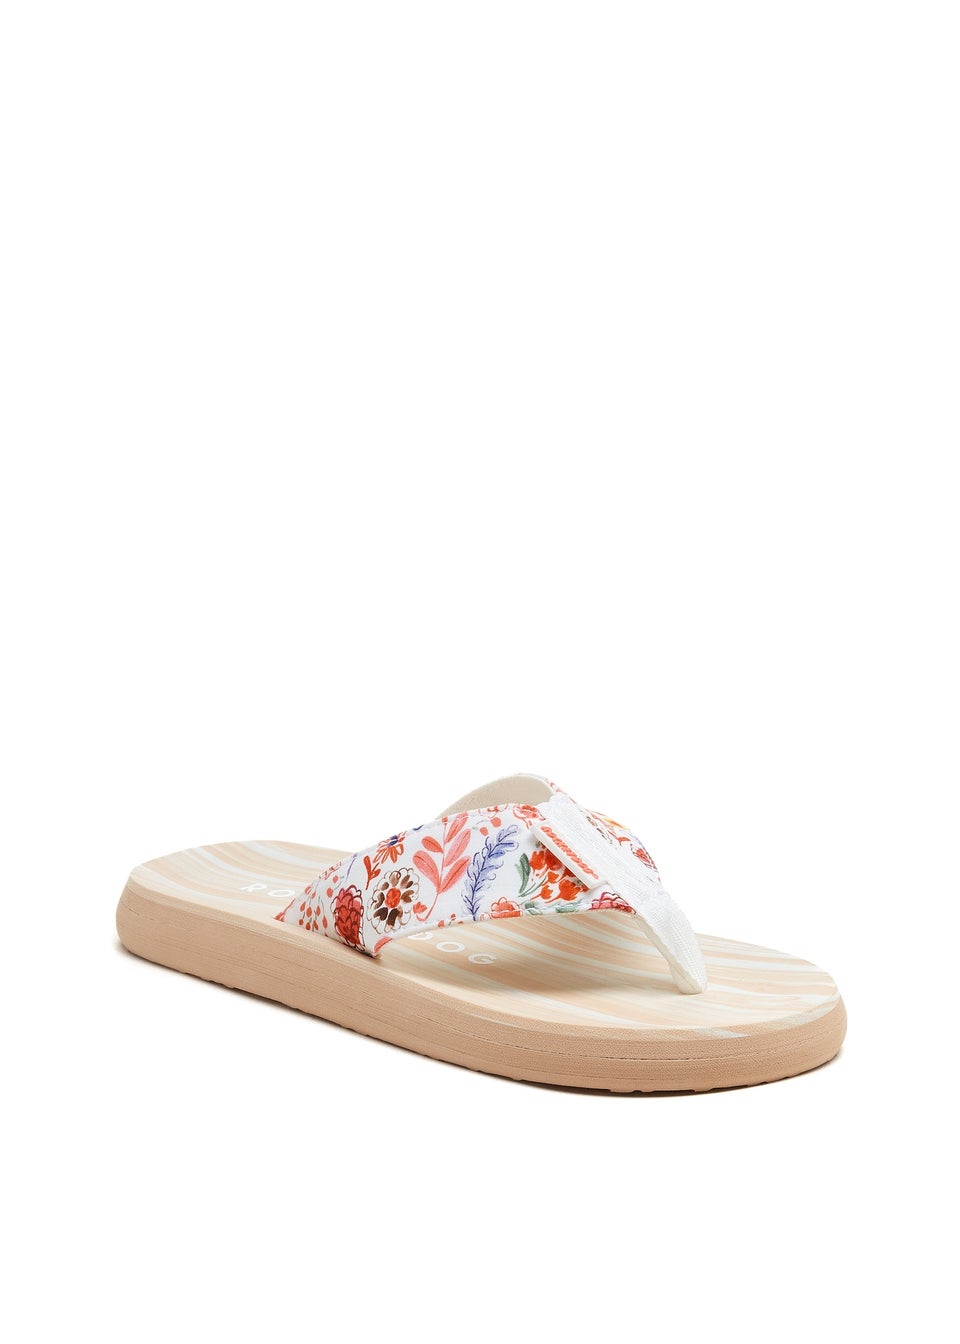 Multicolour Floral Adios Kitts Sandals